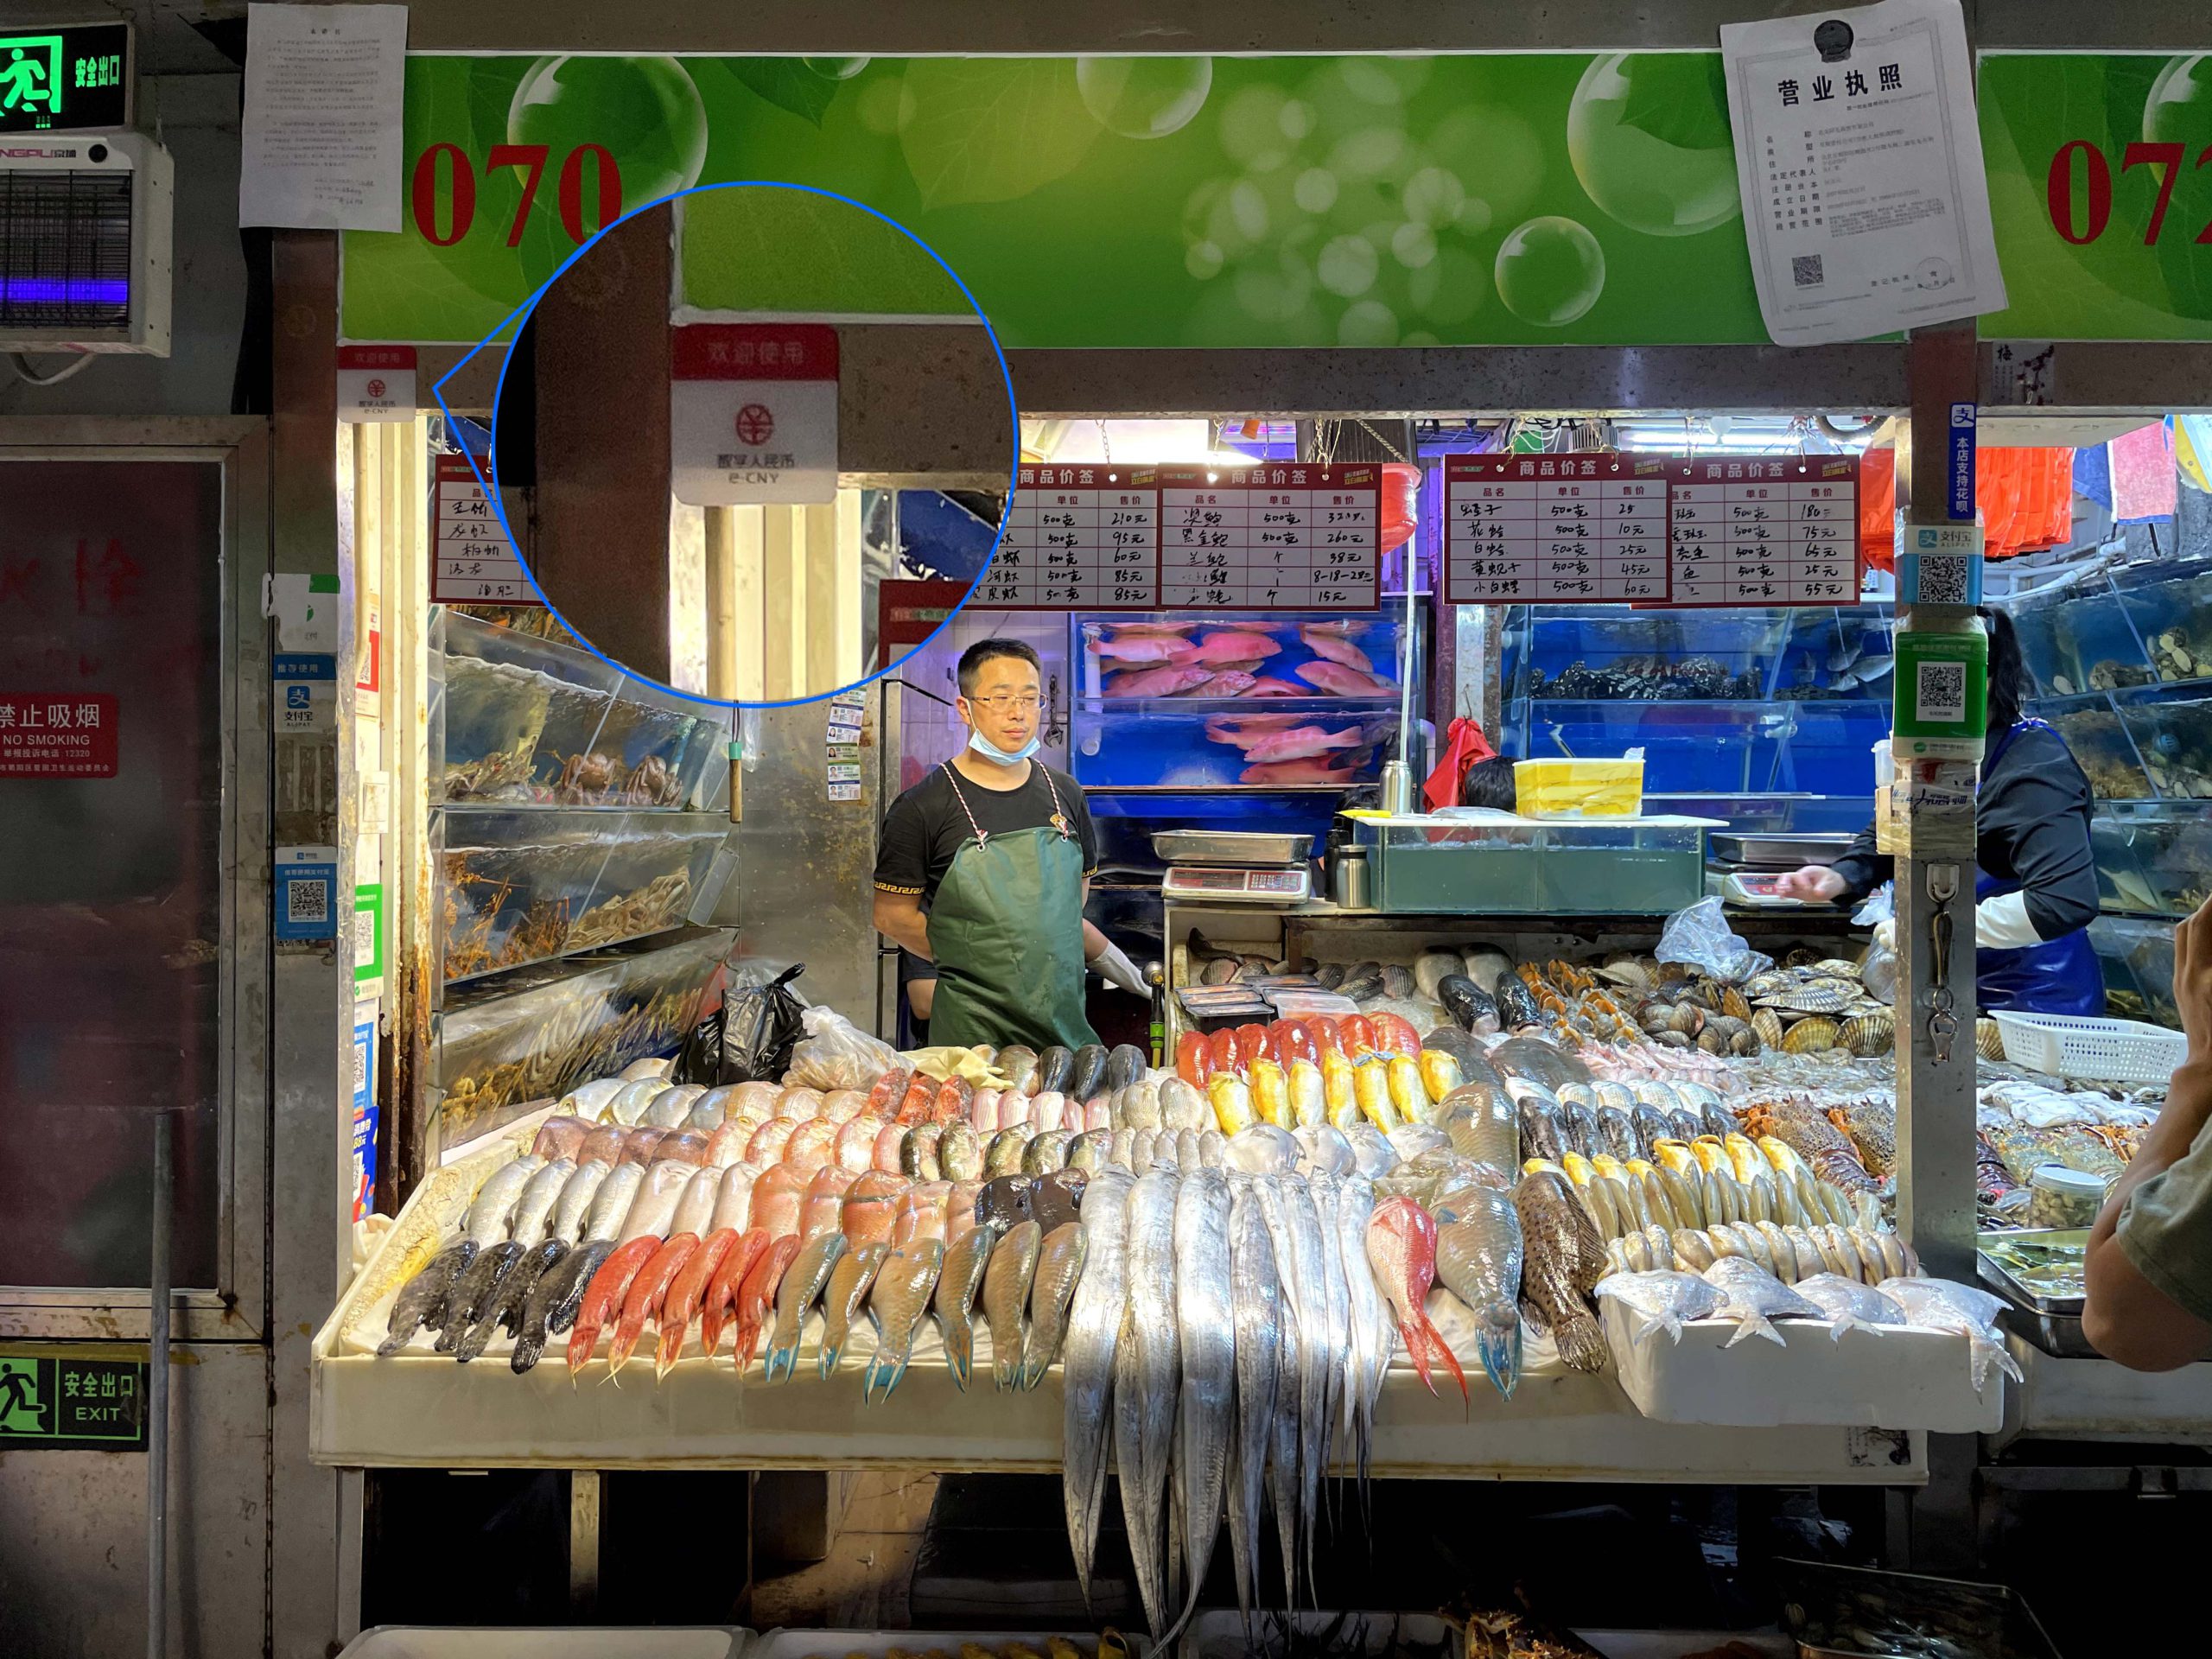 One of the seafood stands in Sanyuanli market where the “Digital Yuan” sign is posted under the stand’s number. Photo by KrASIA.